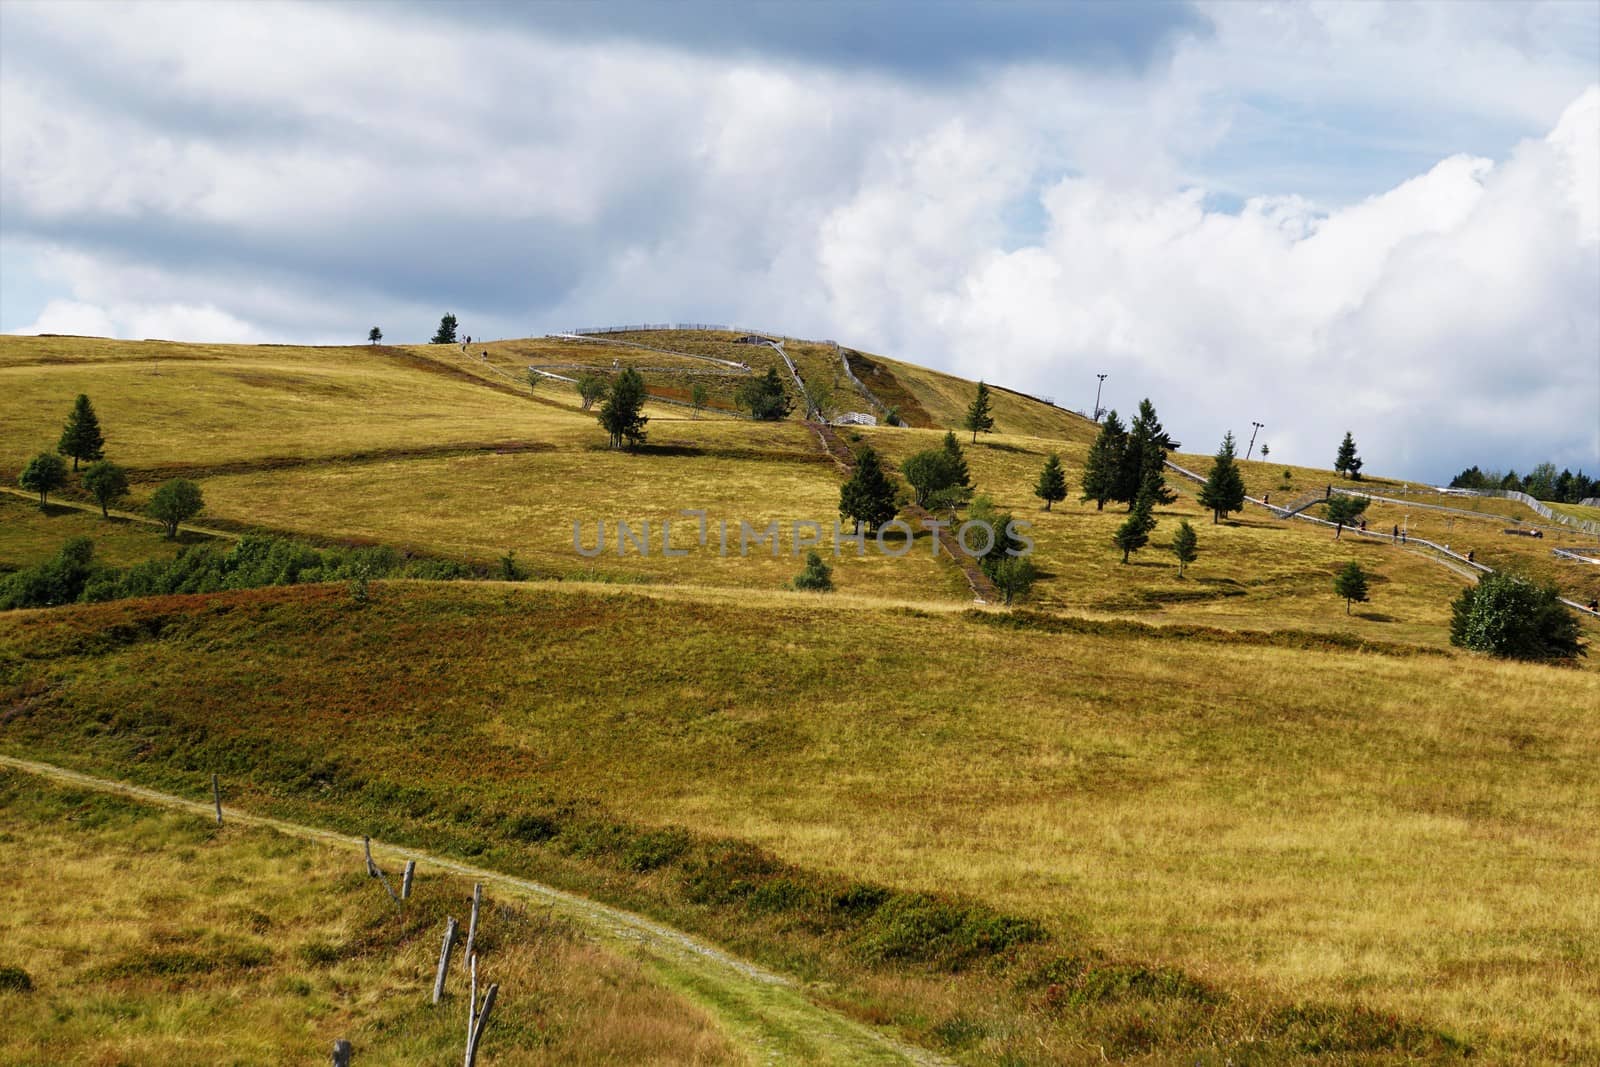 Summer bob track on Le Markstein mountain in the Vosges, France